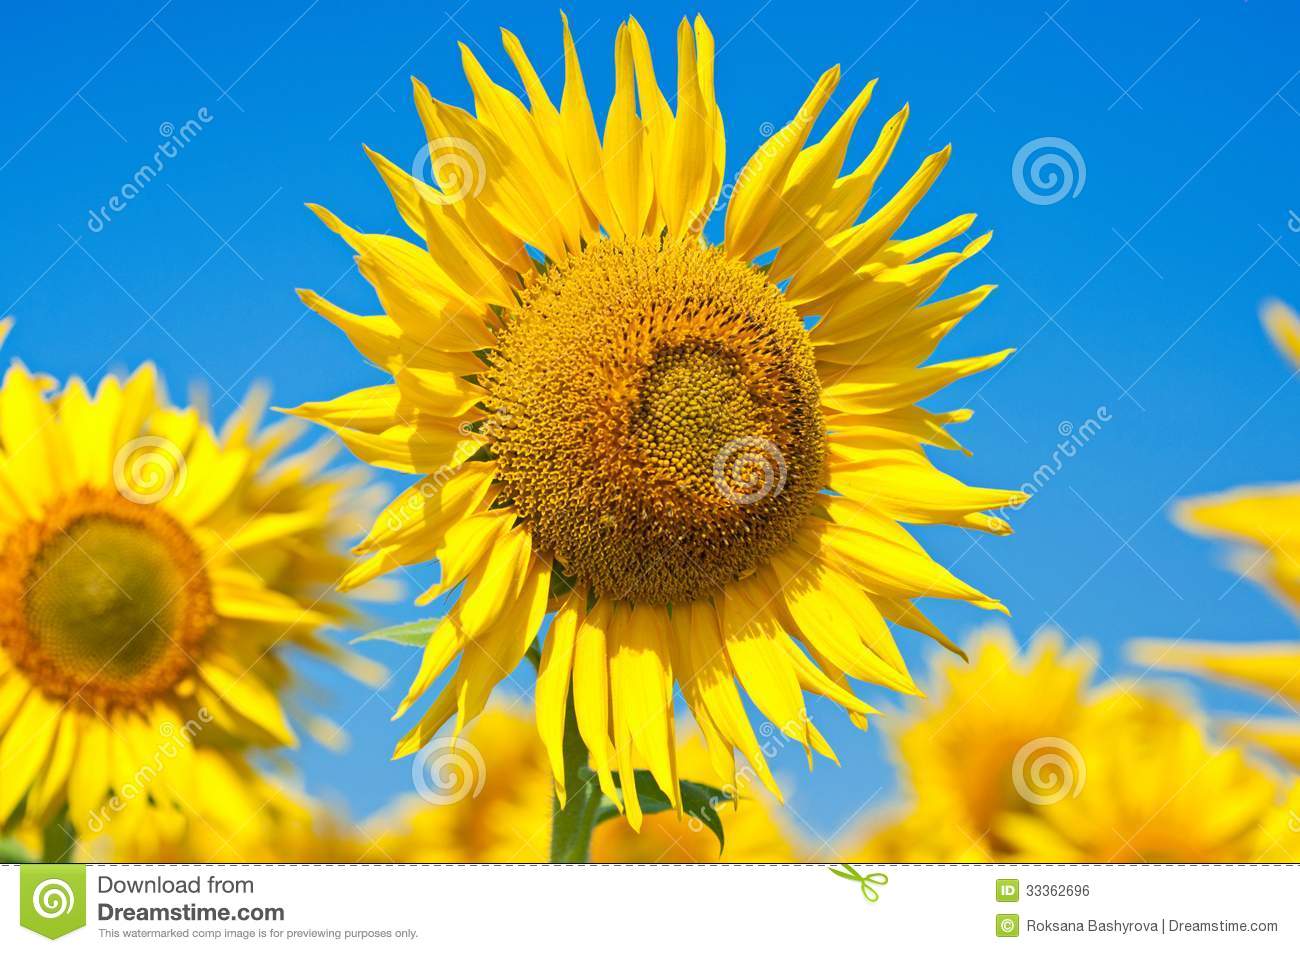 Yellow Sunflowers With Green Leaves Against The Blue Sky Floral